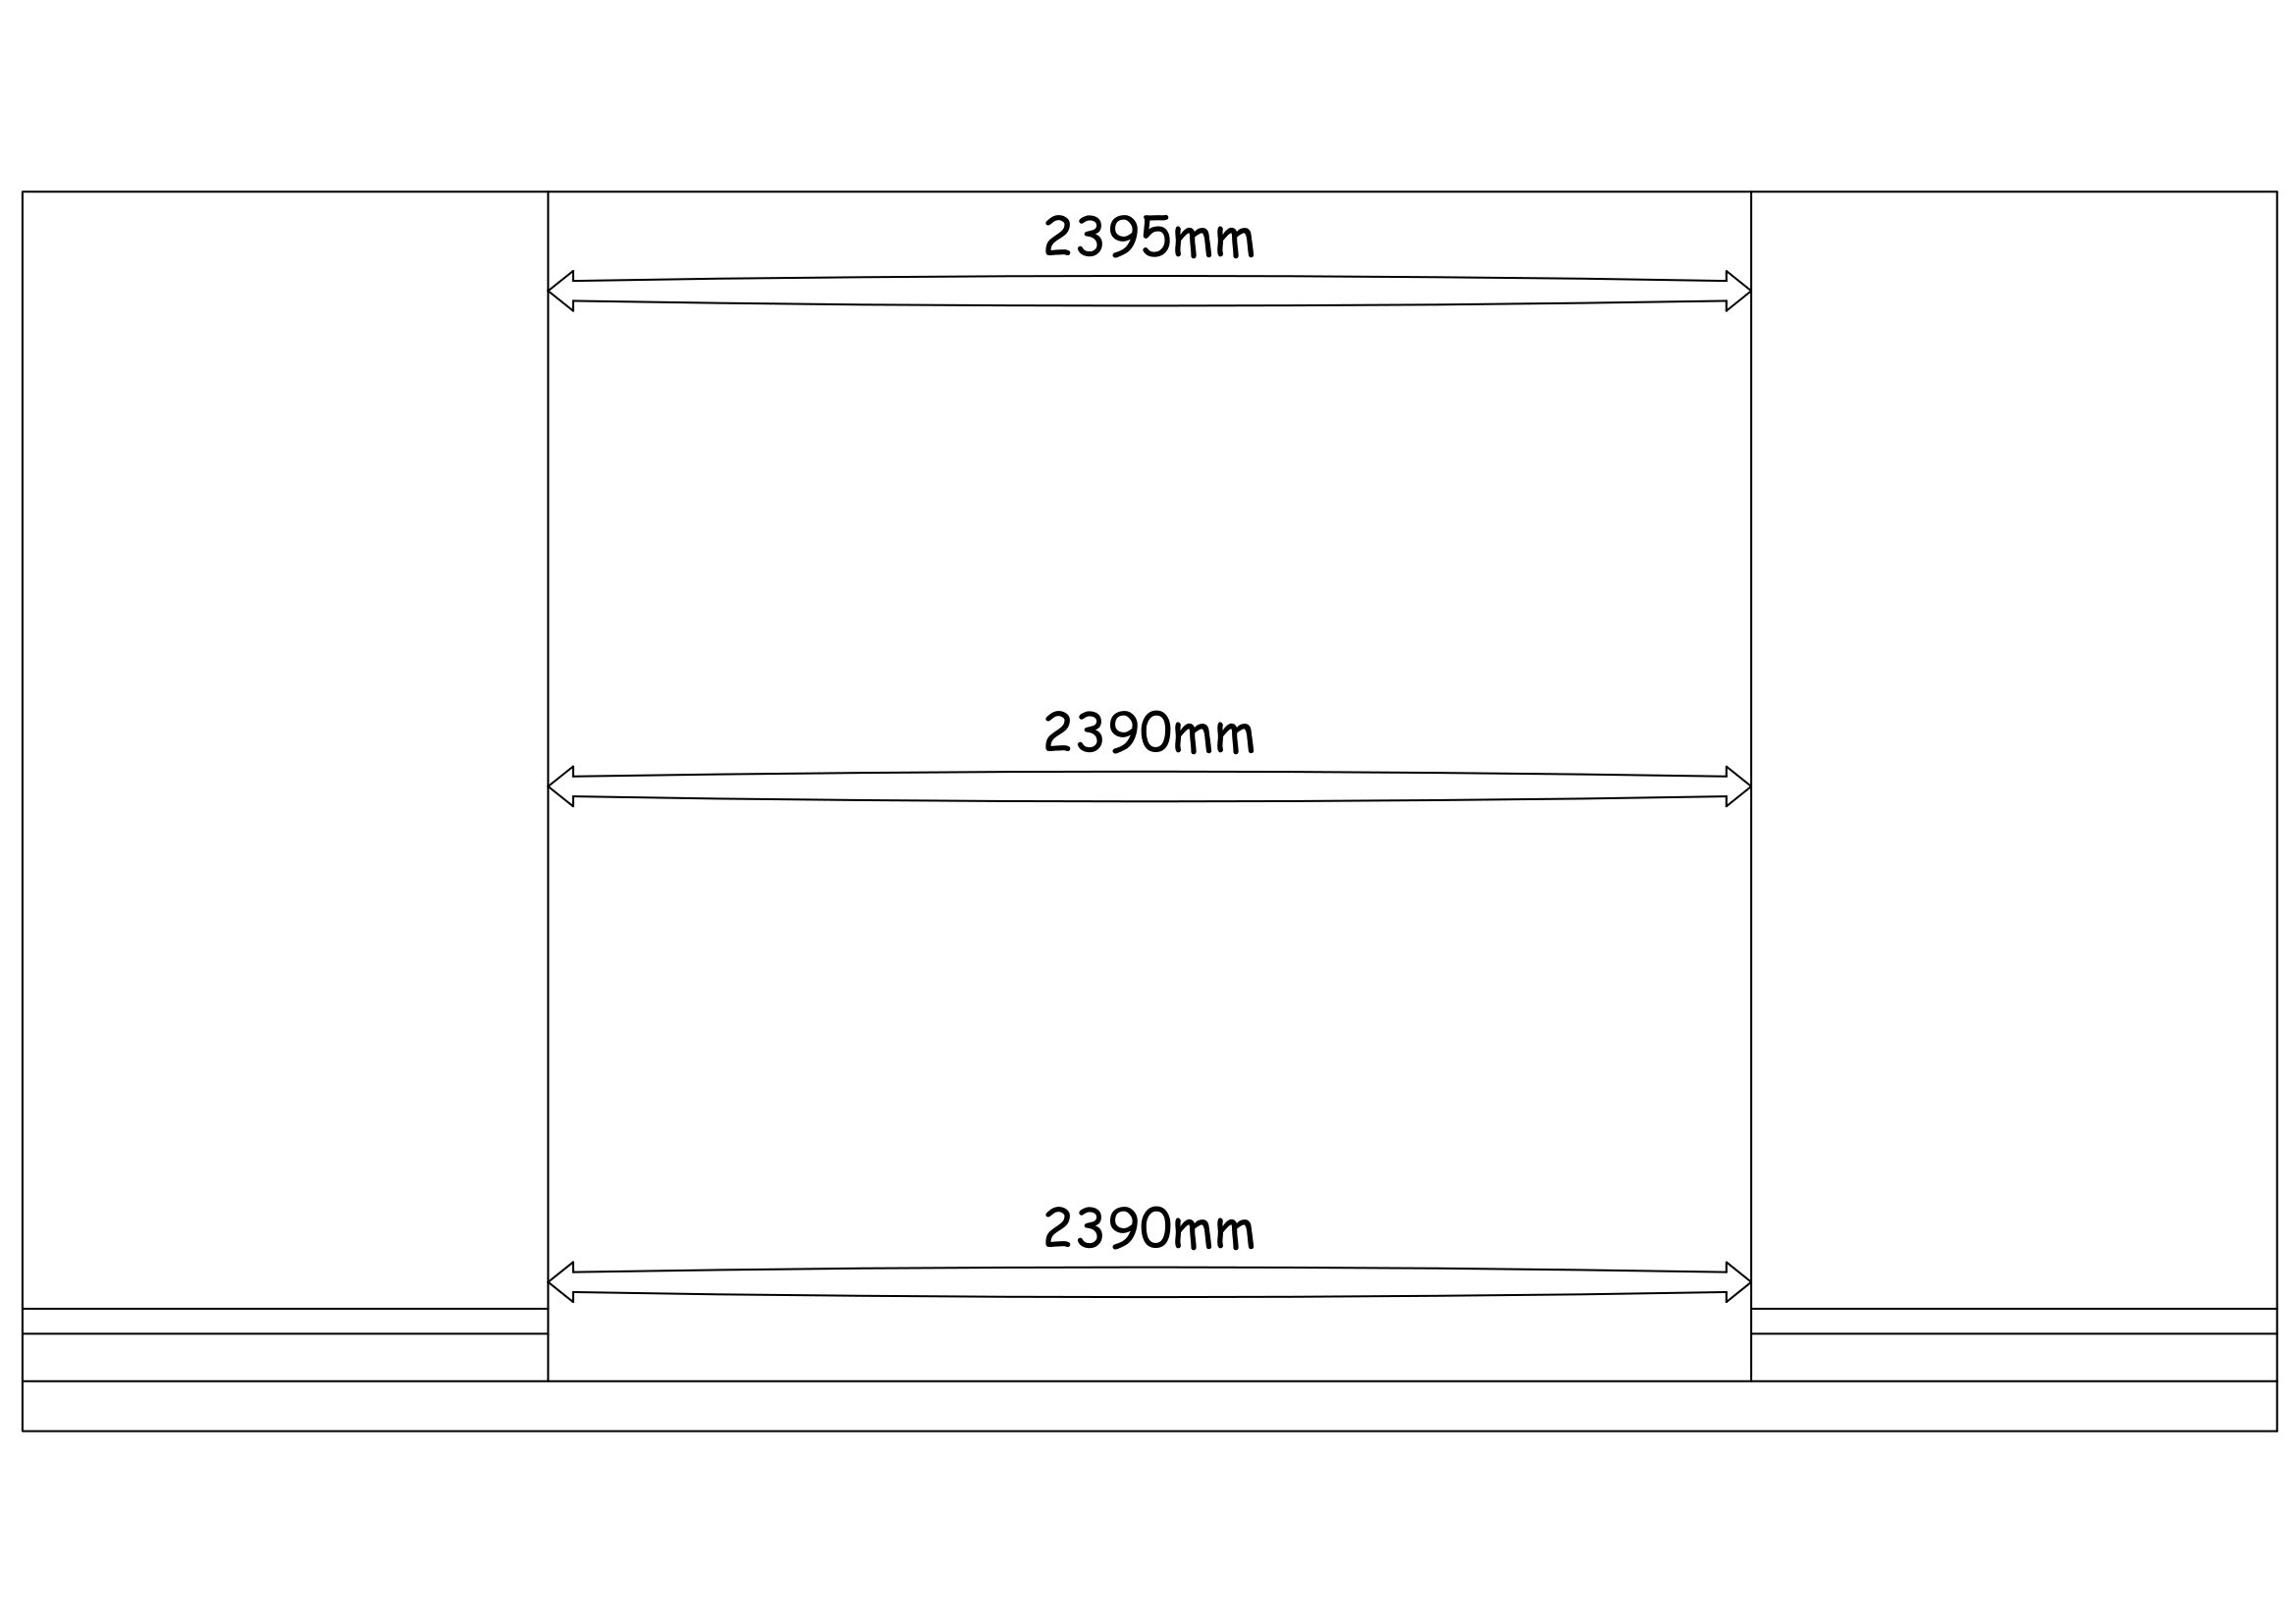 14 - How to Measure for a Wardrobe Opening for New Sliding Door Wardrobe #2.jpg